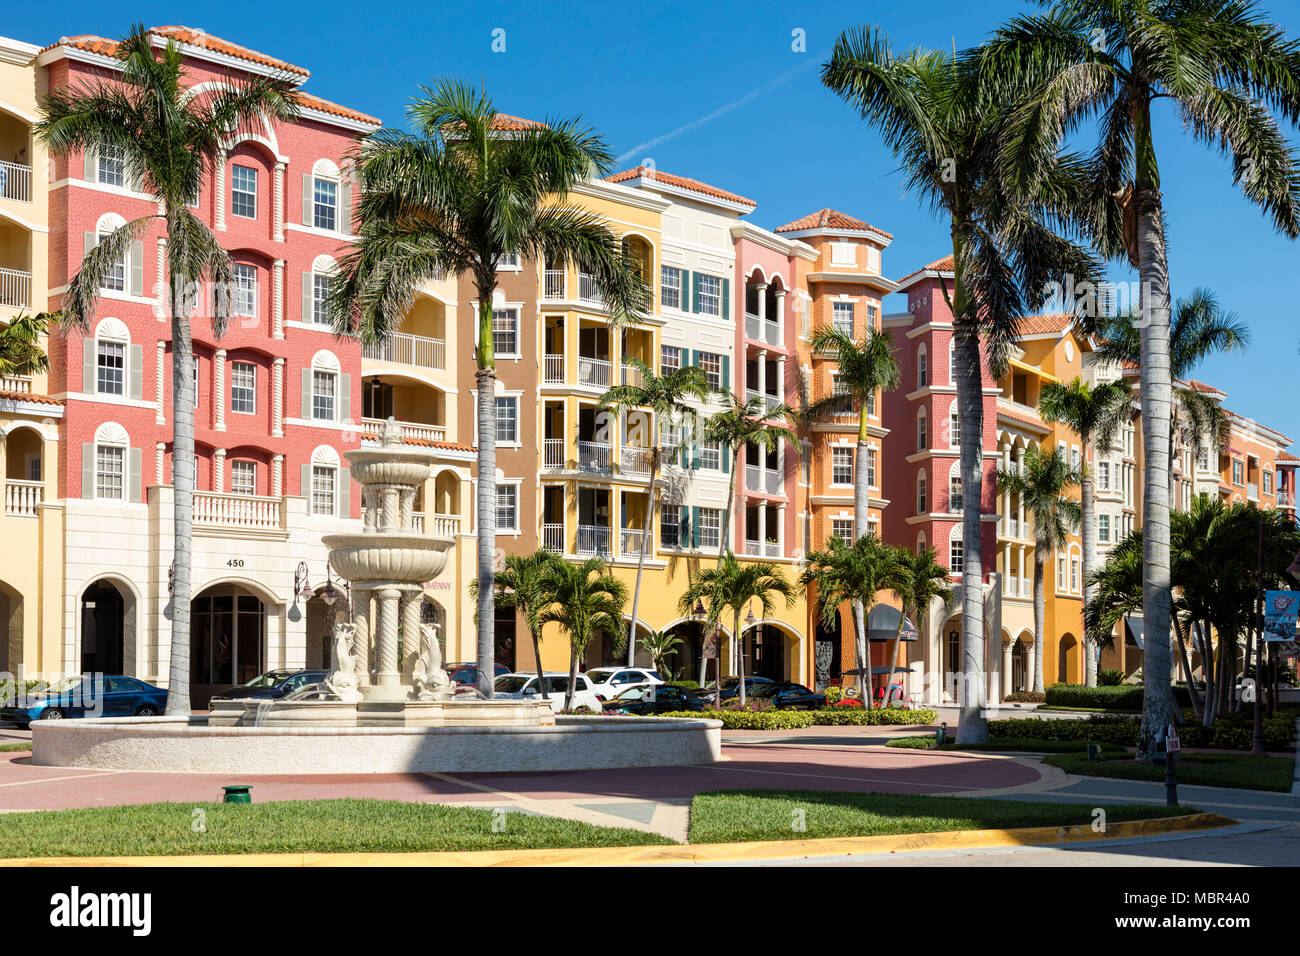 Bayfront, an upscale commercial and residential community in Naples, Florida, USA Stock Photo